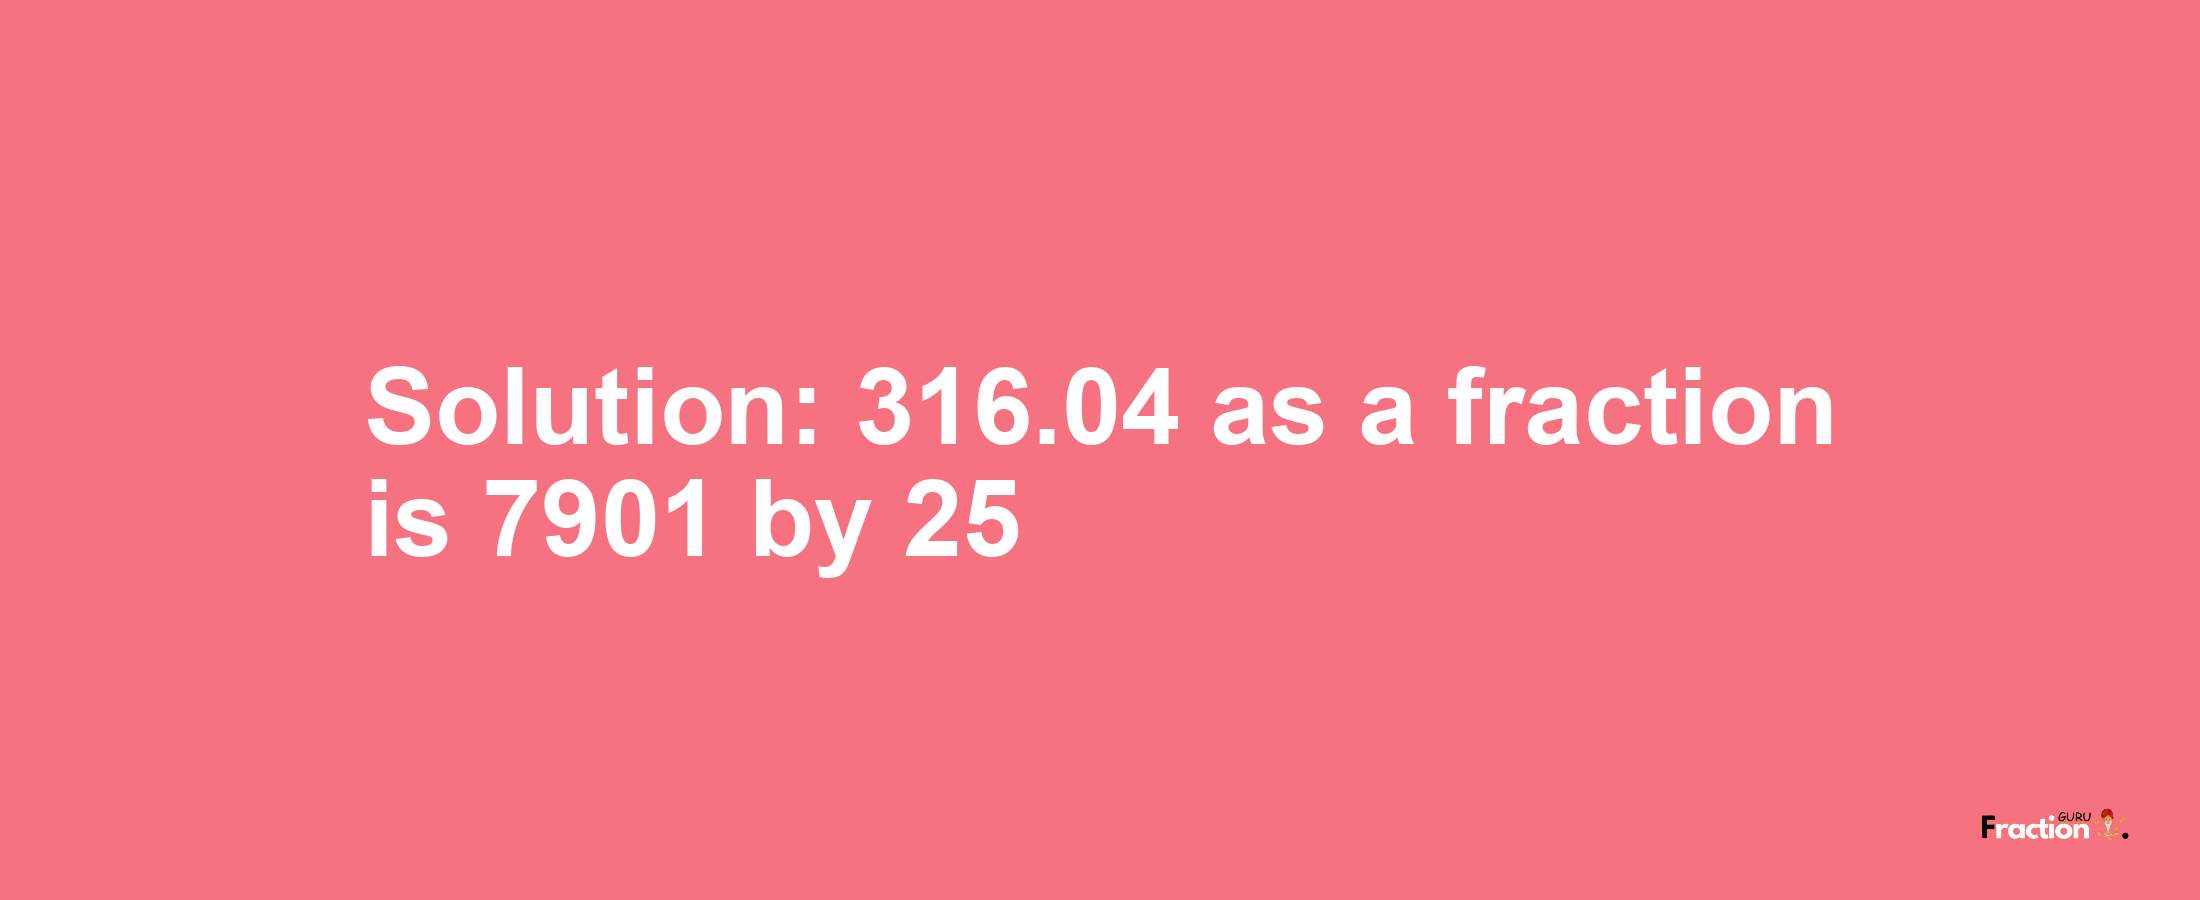 Solution:316.04 as a fraction is 7901/25